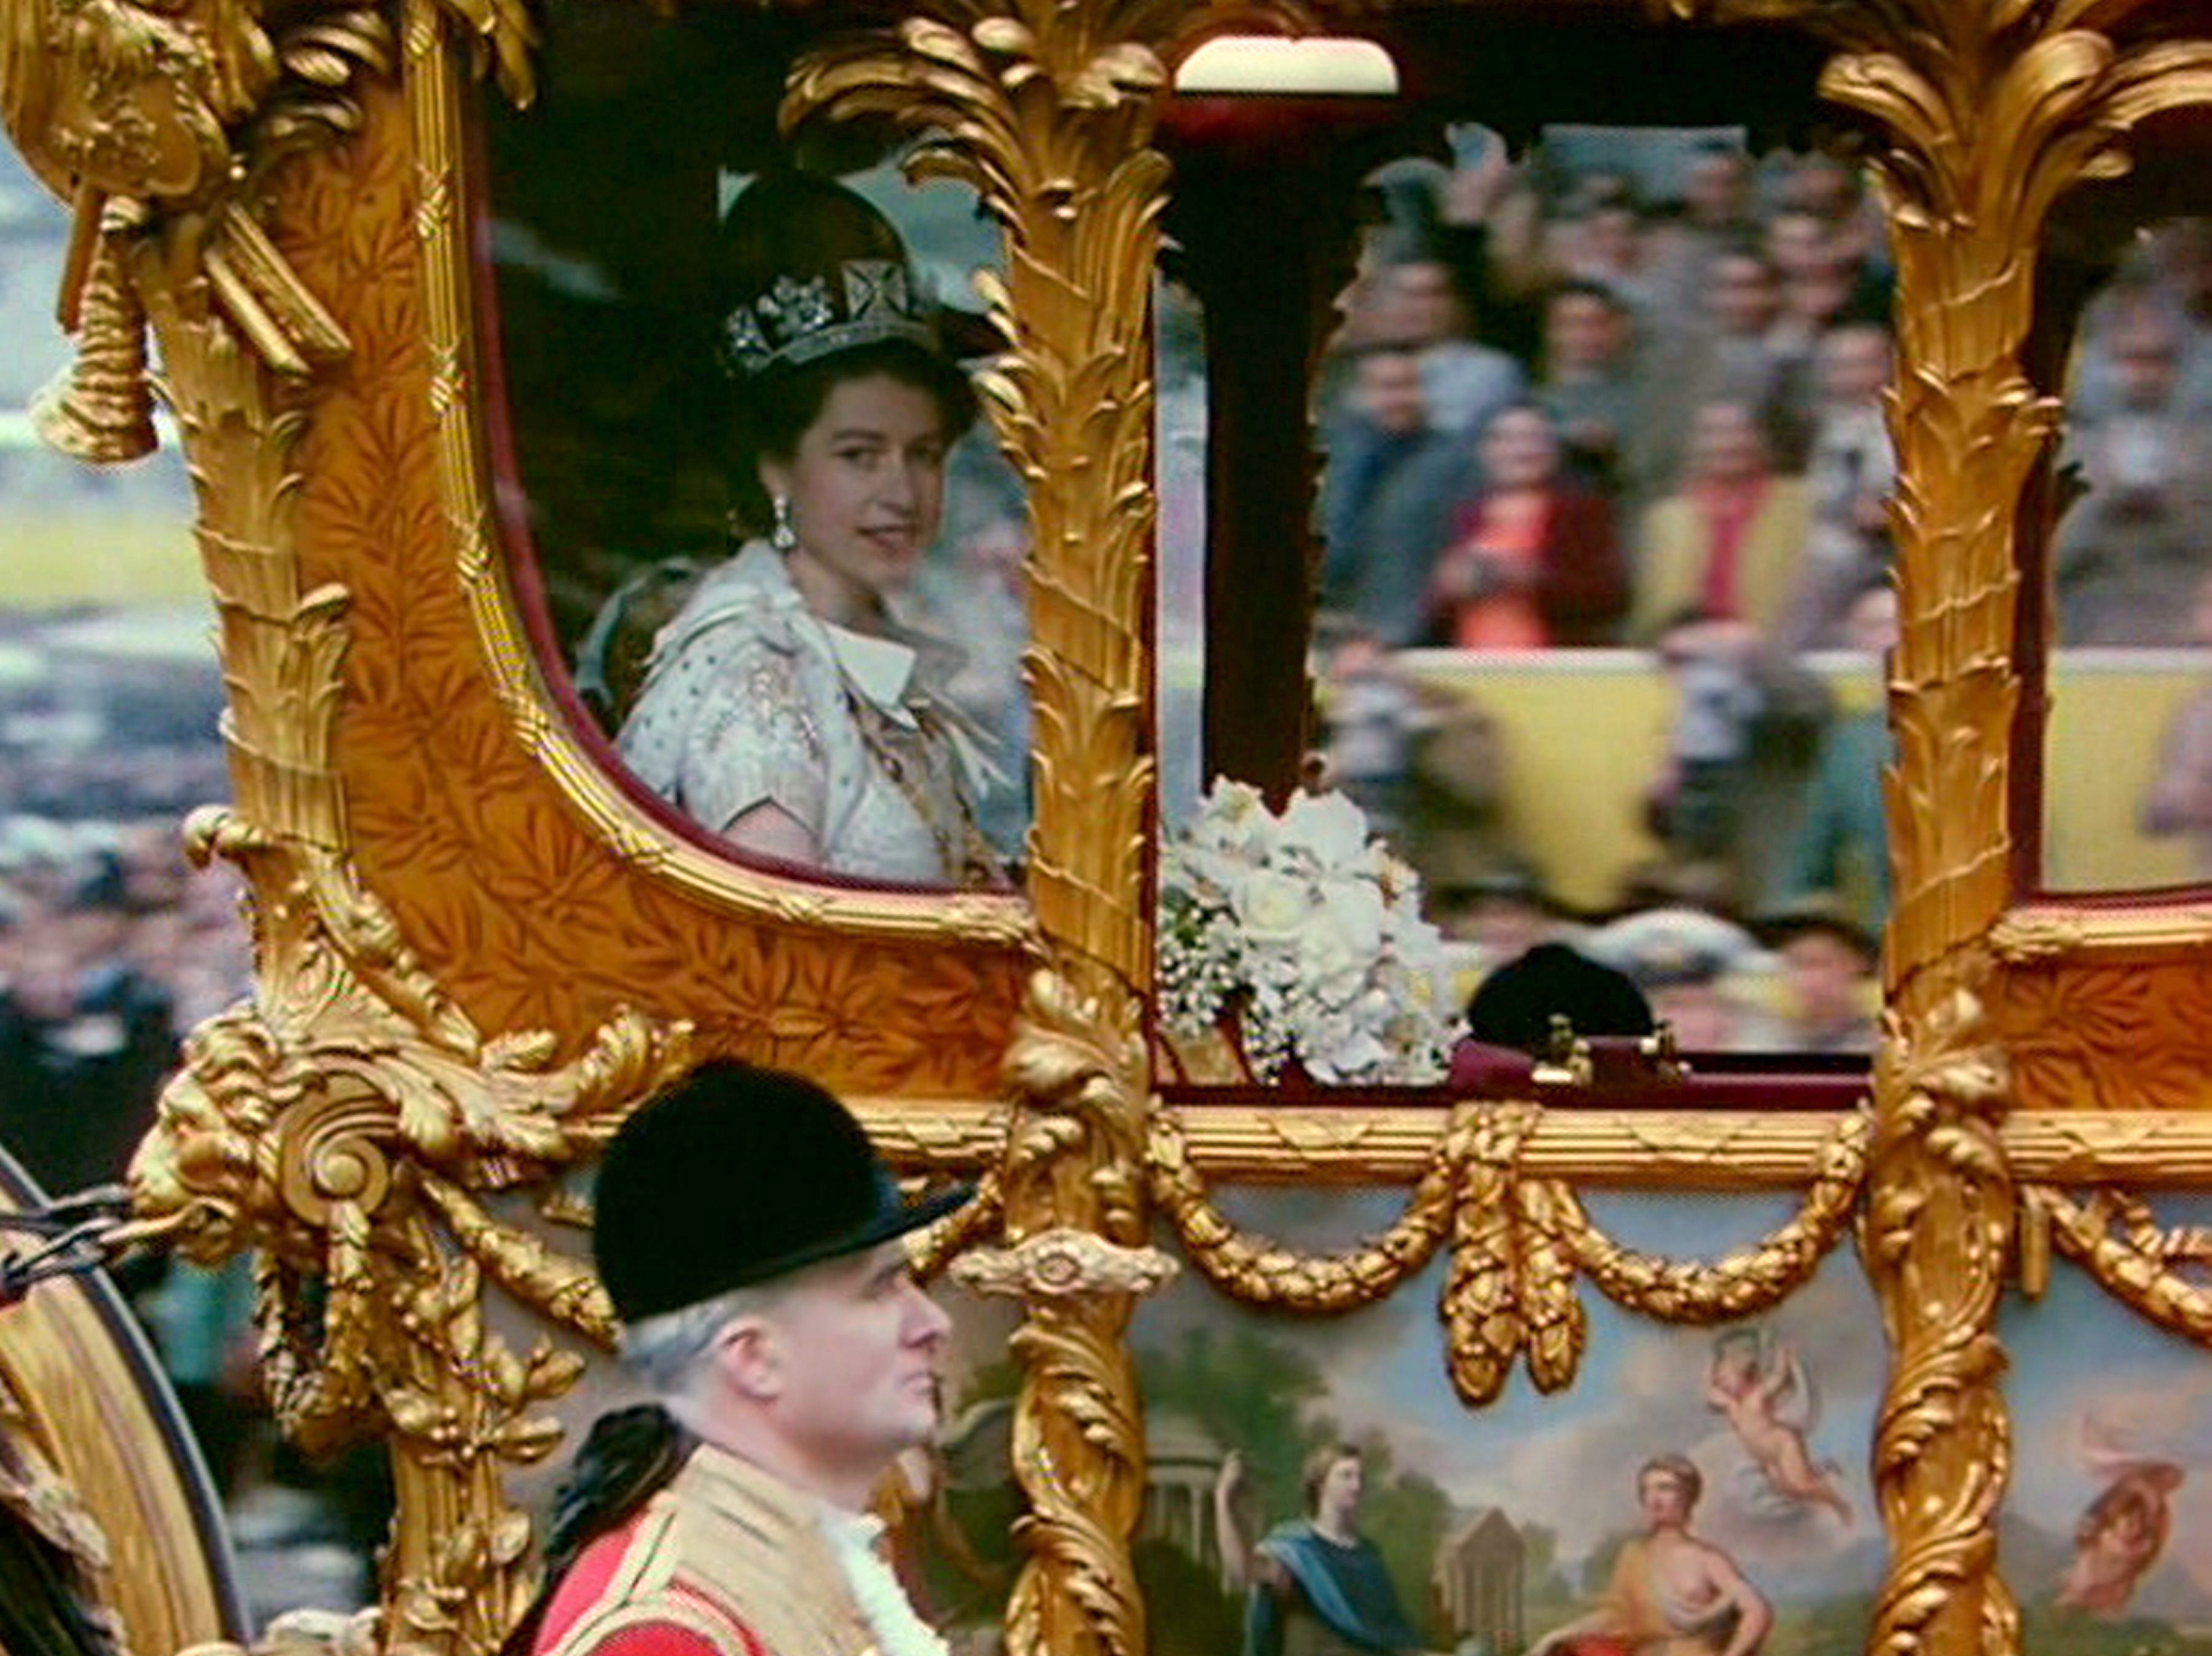 TV tonight The Queen in the Golden State Coach after the Coronation